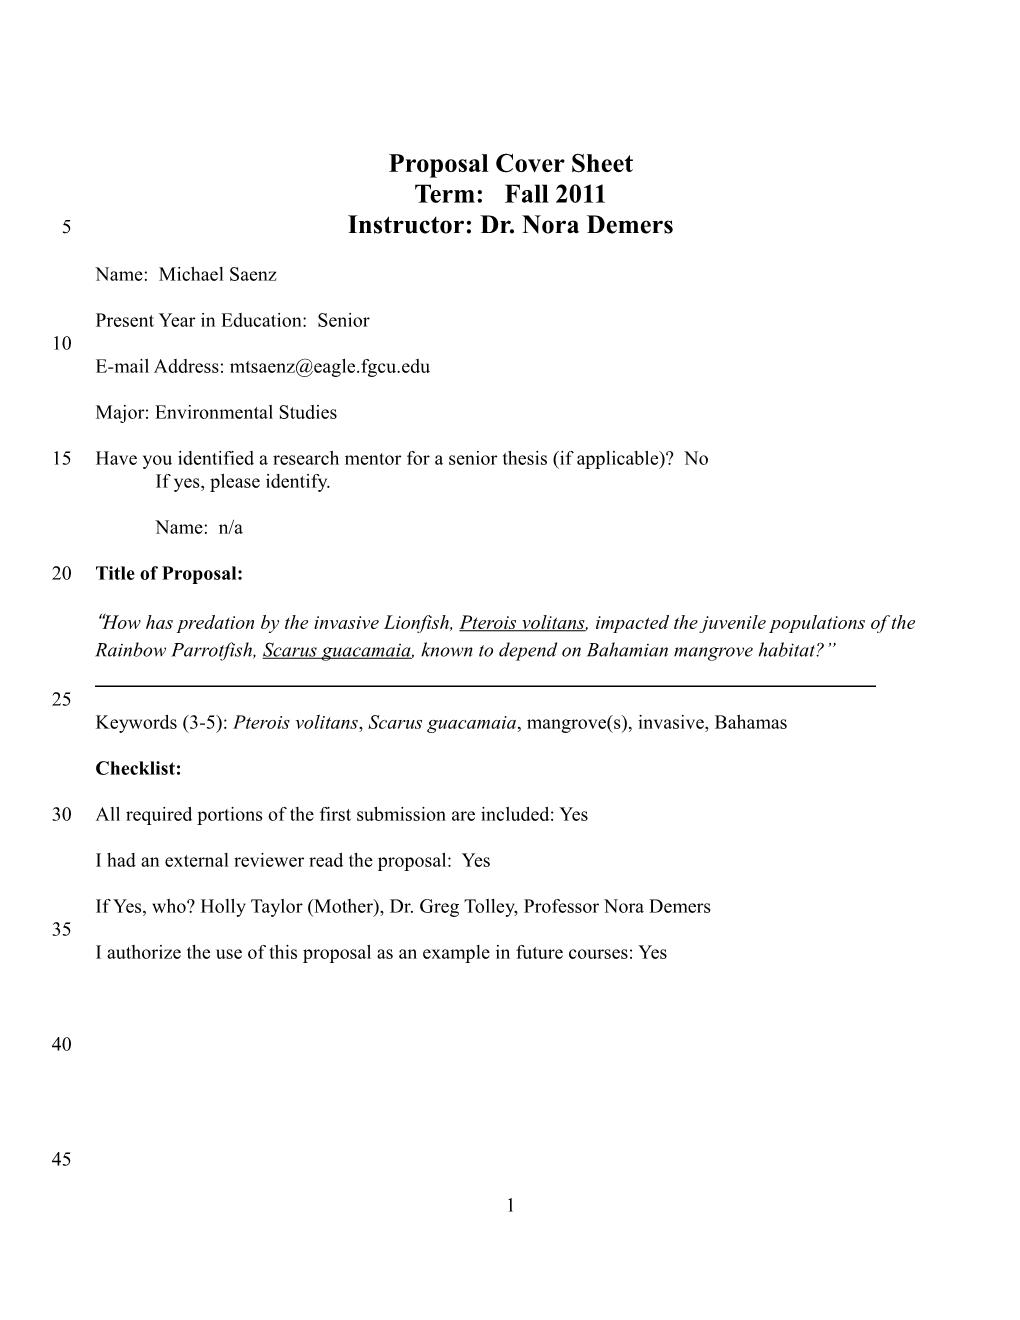 Proposal Cover Sheet s1